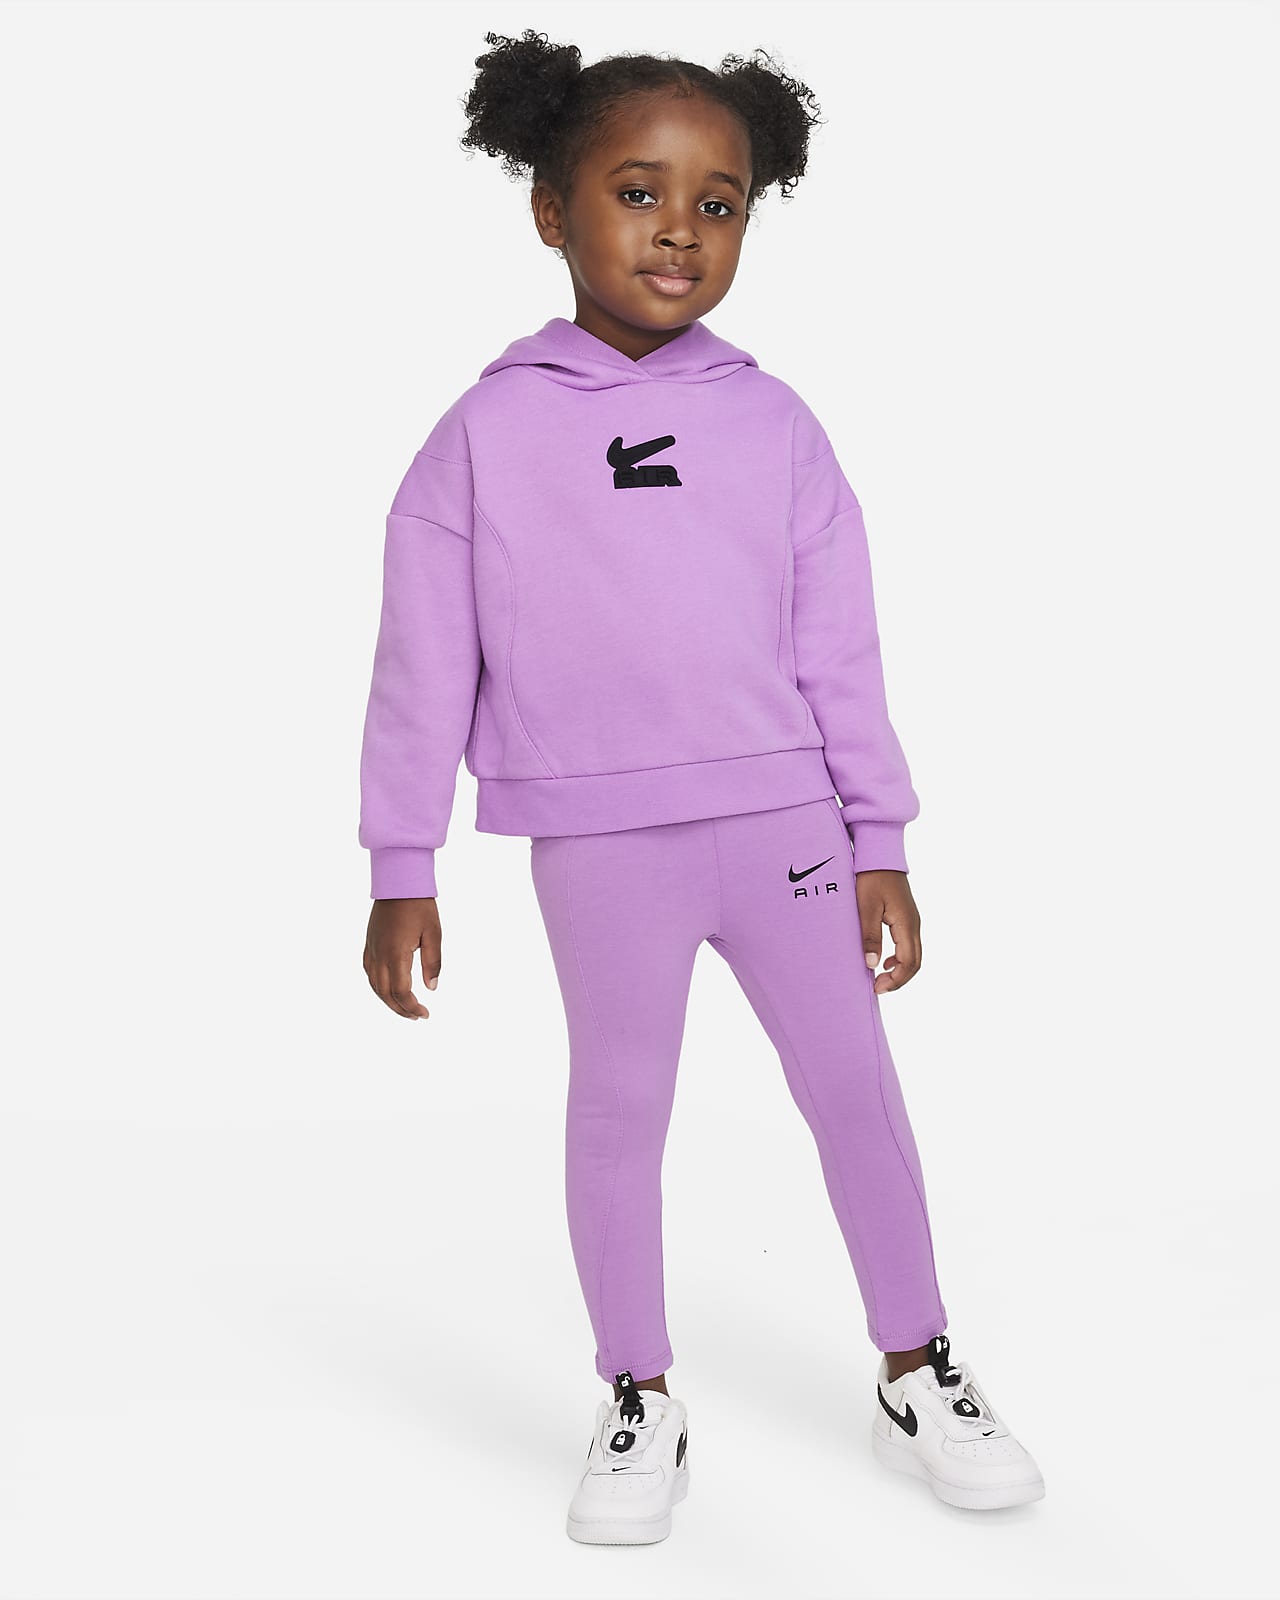 Nike Air French Terry Pullover and Leggings Set Toddler Set